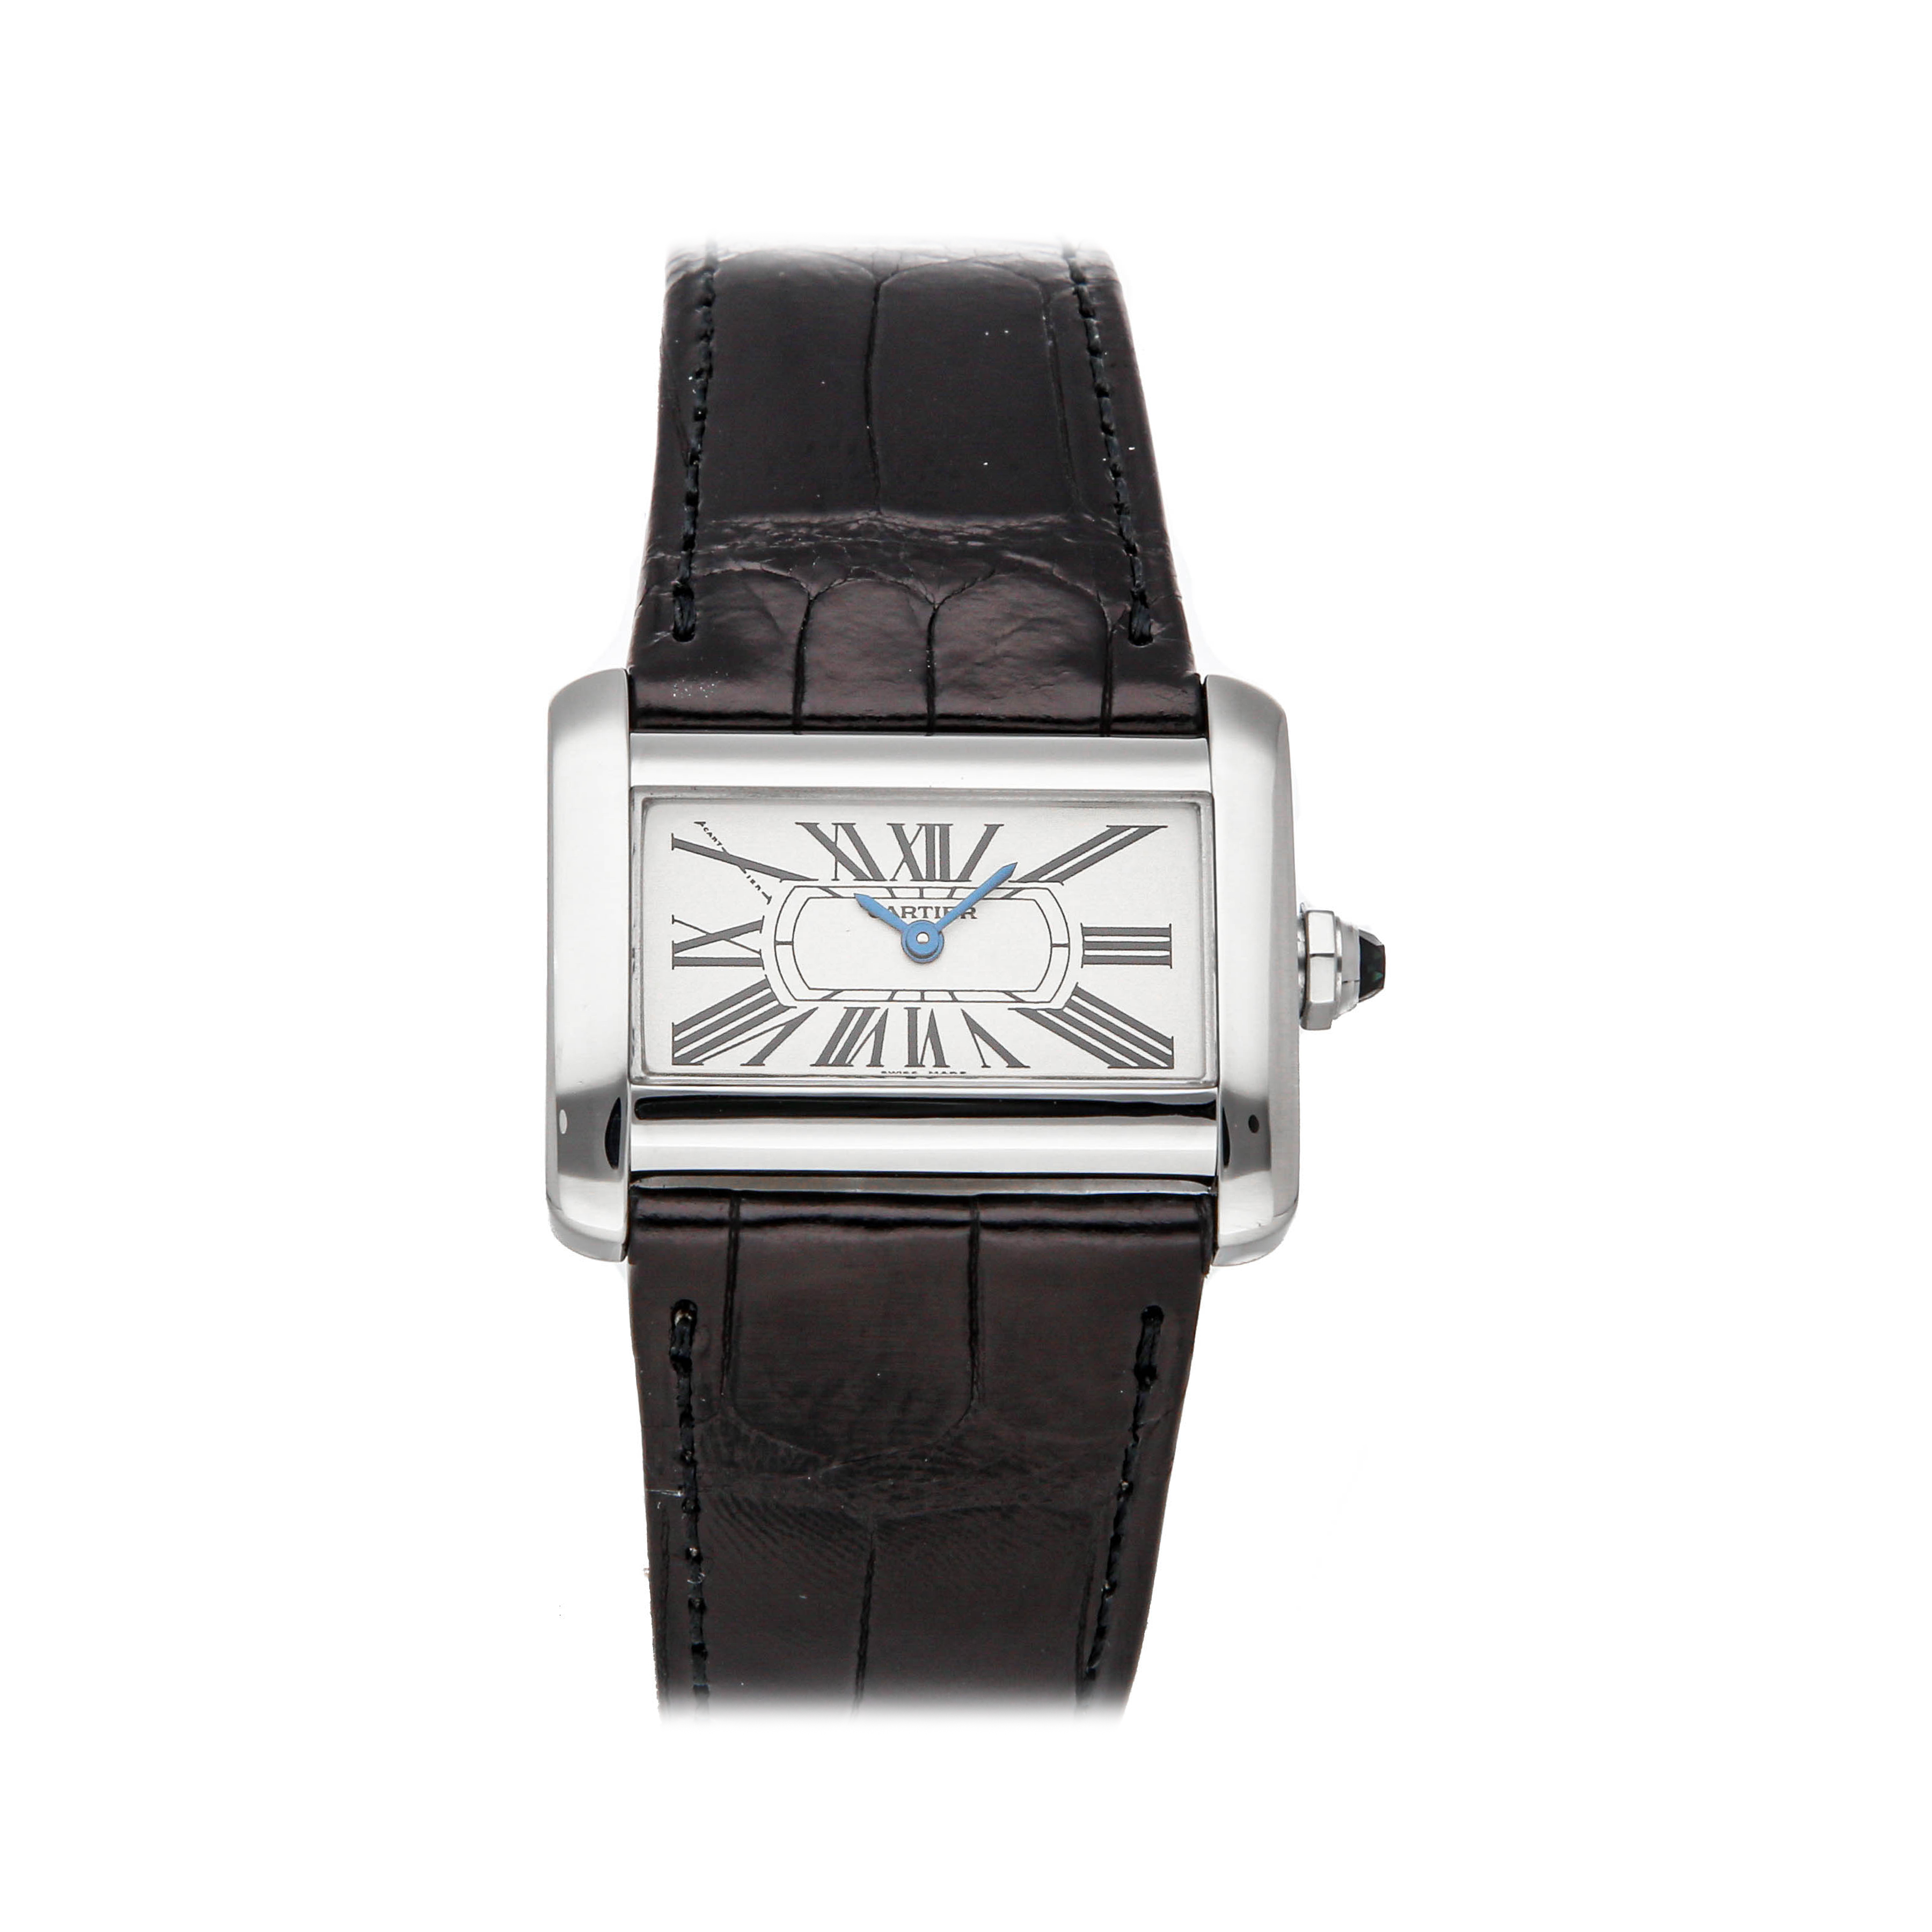 Cartier Tank | Certified Pre-Owned 